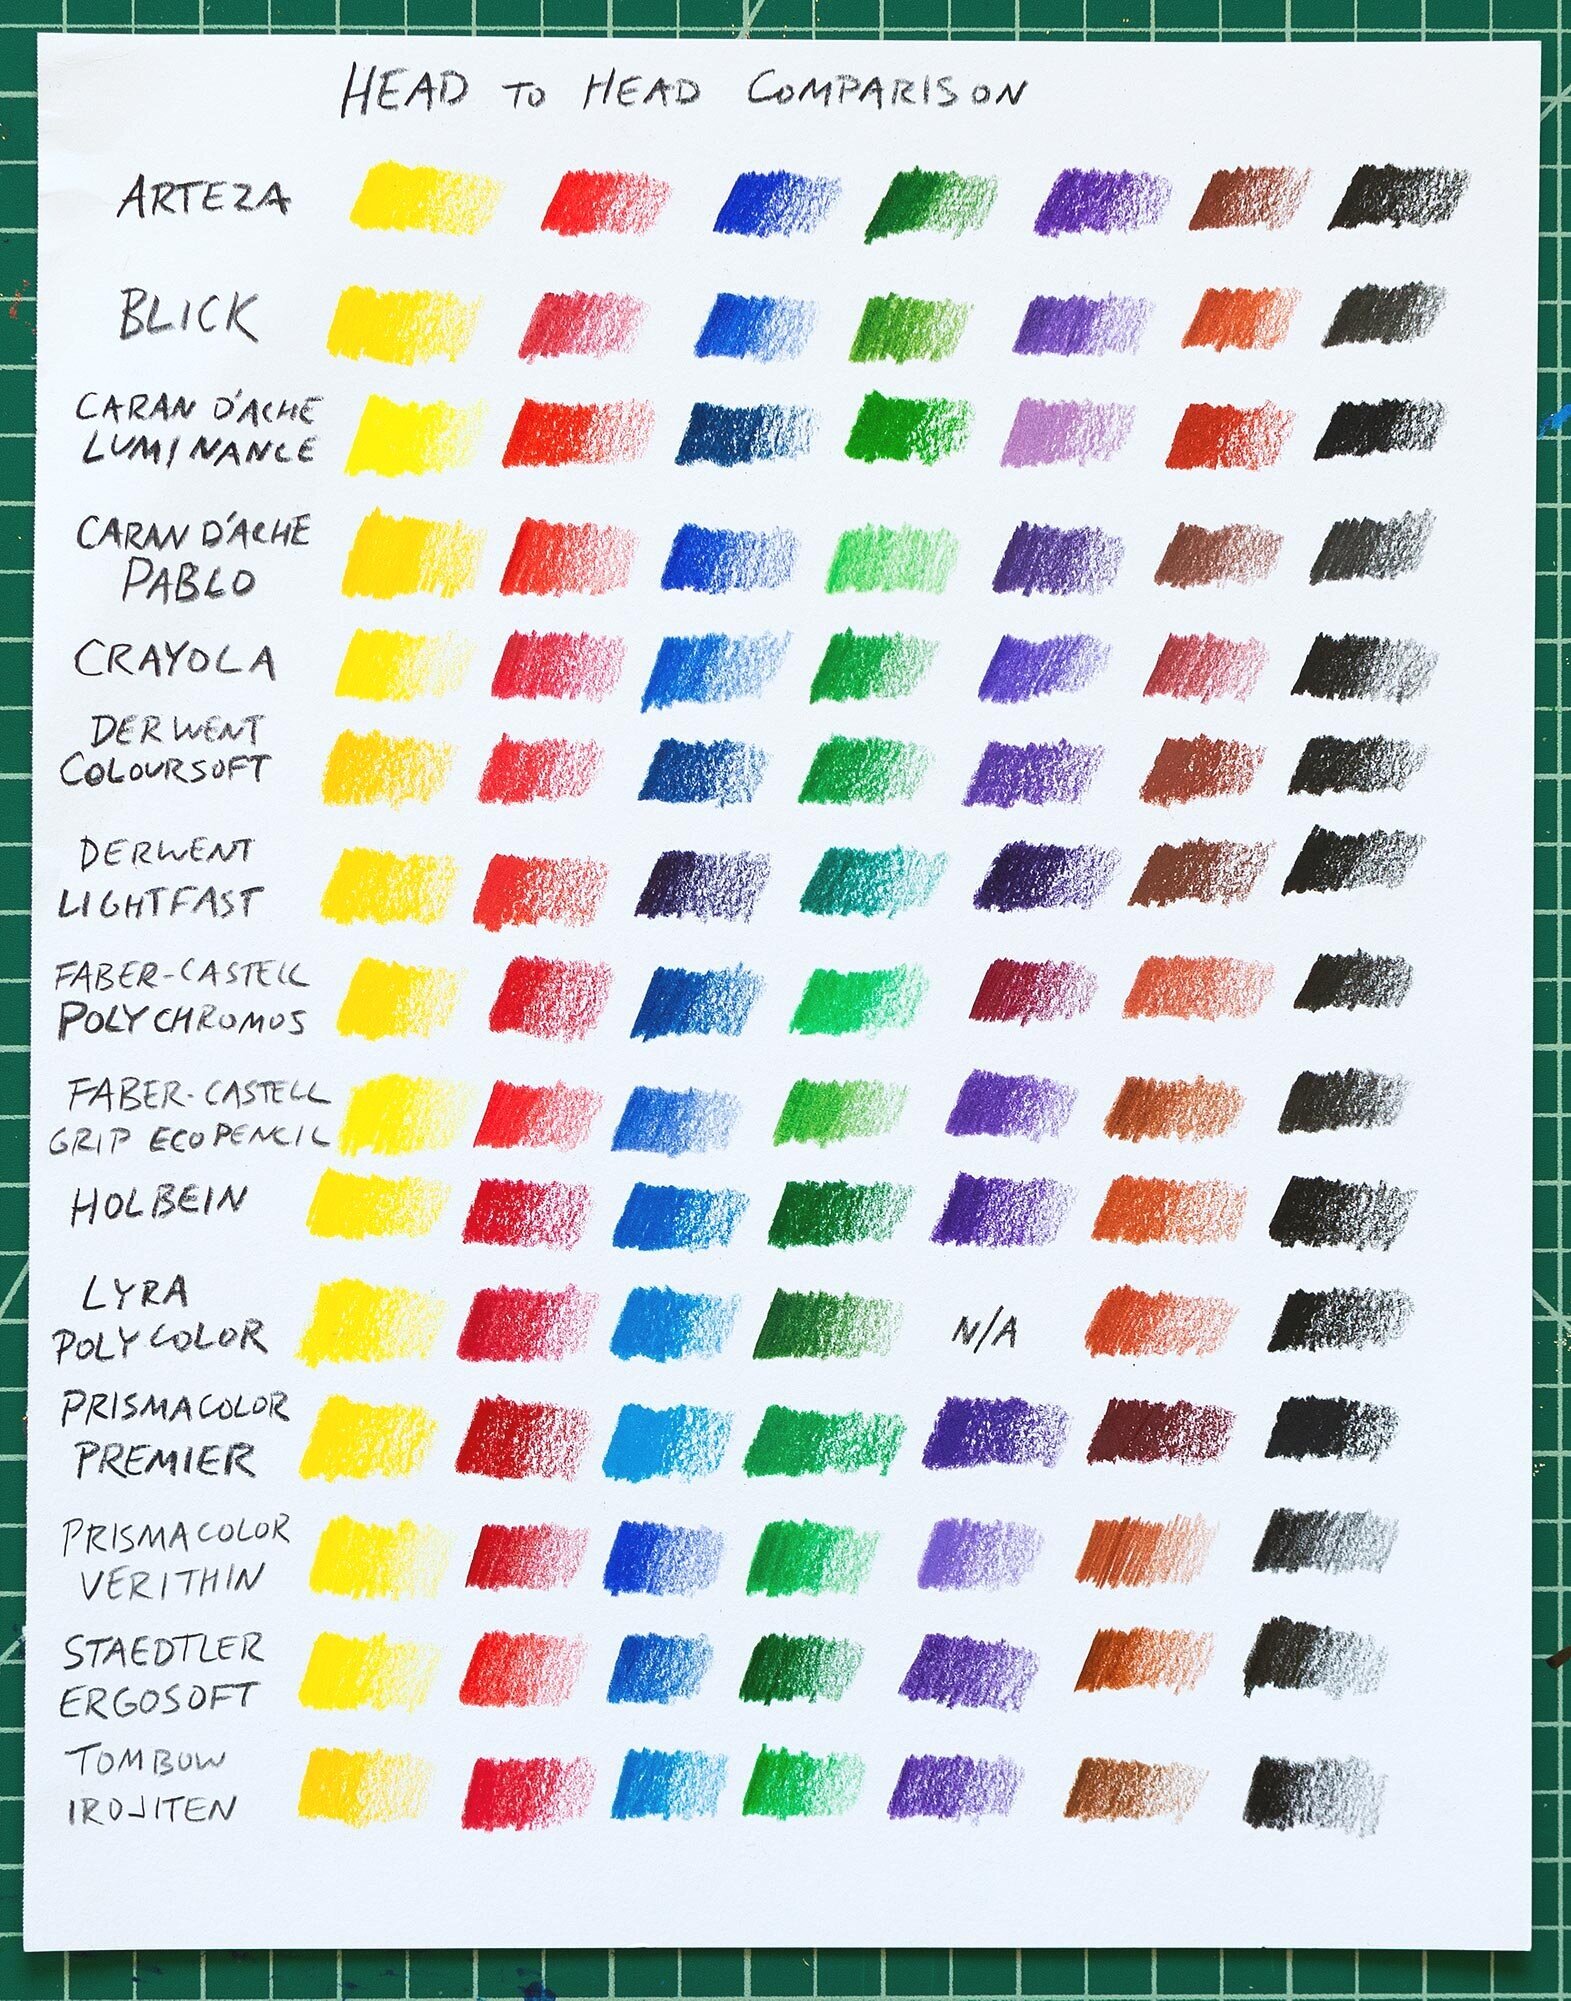 The Ultimate Colored Pencil Comparison: Testing all the Best